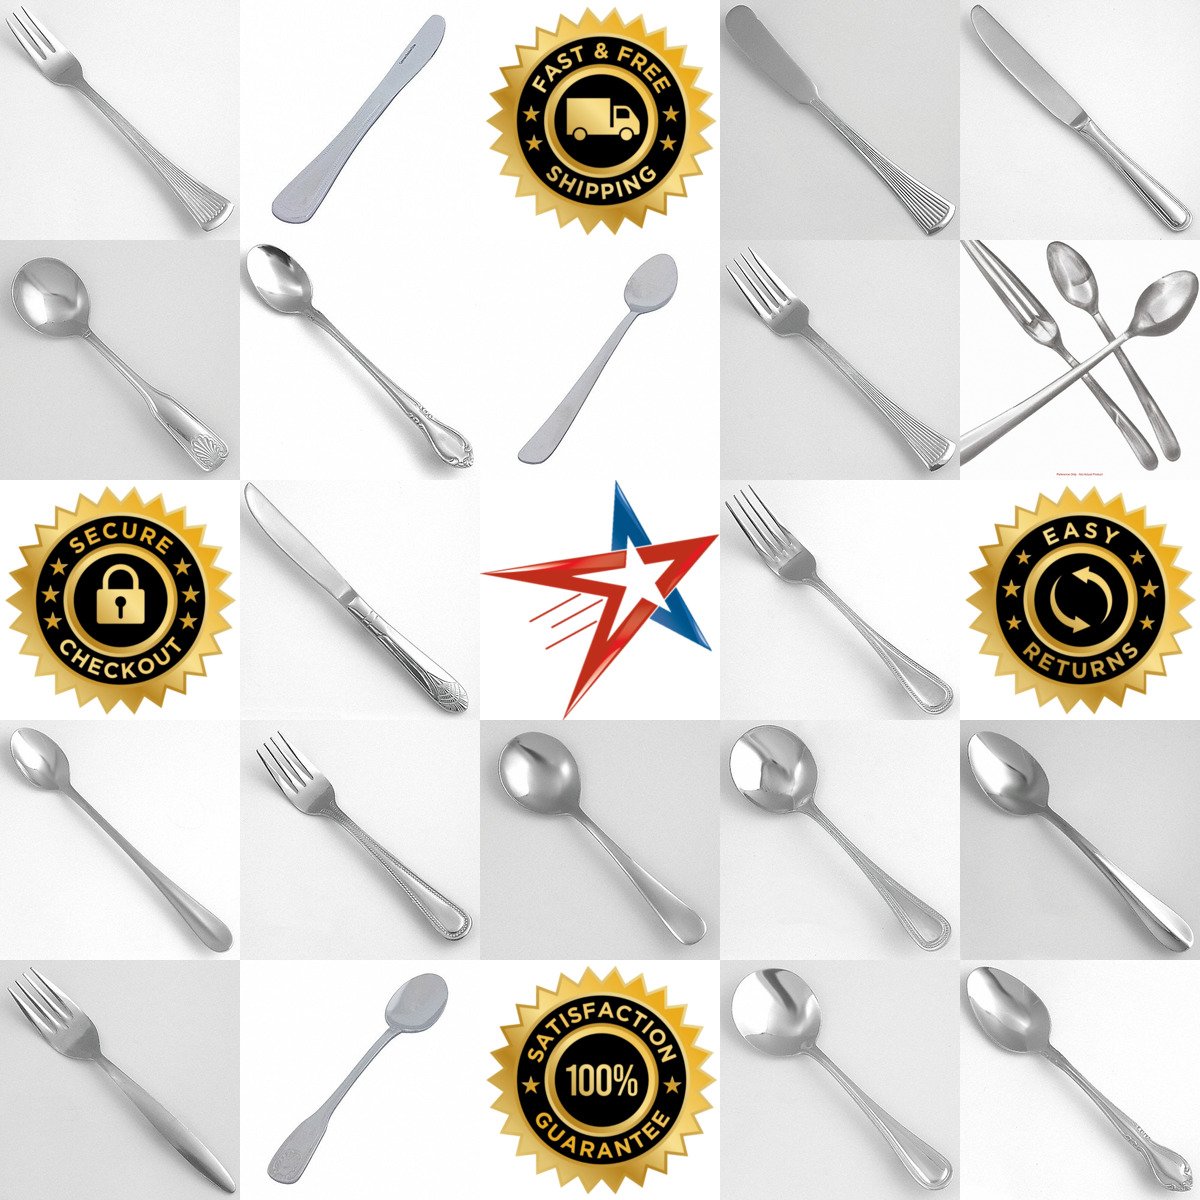 A selection of Flatware products on GoVets